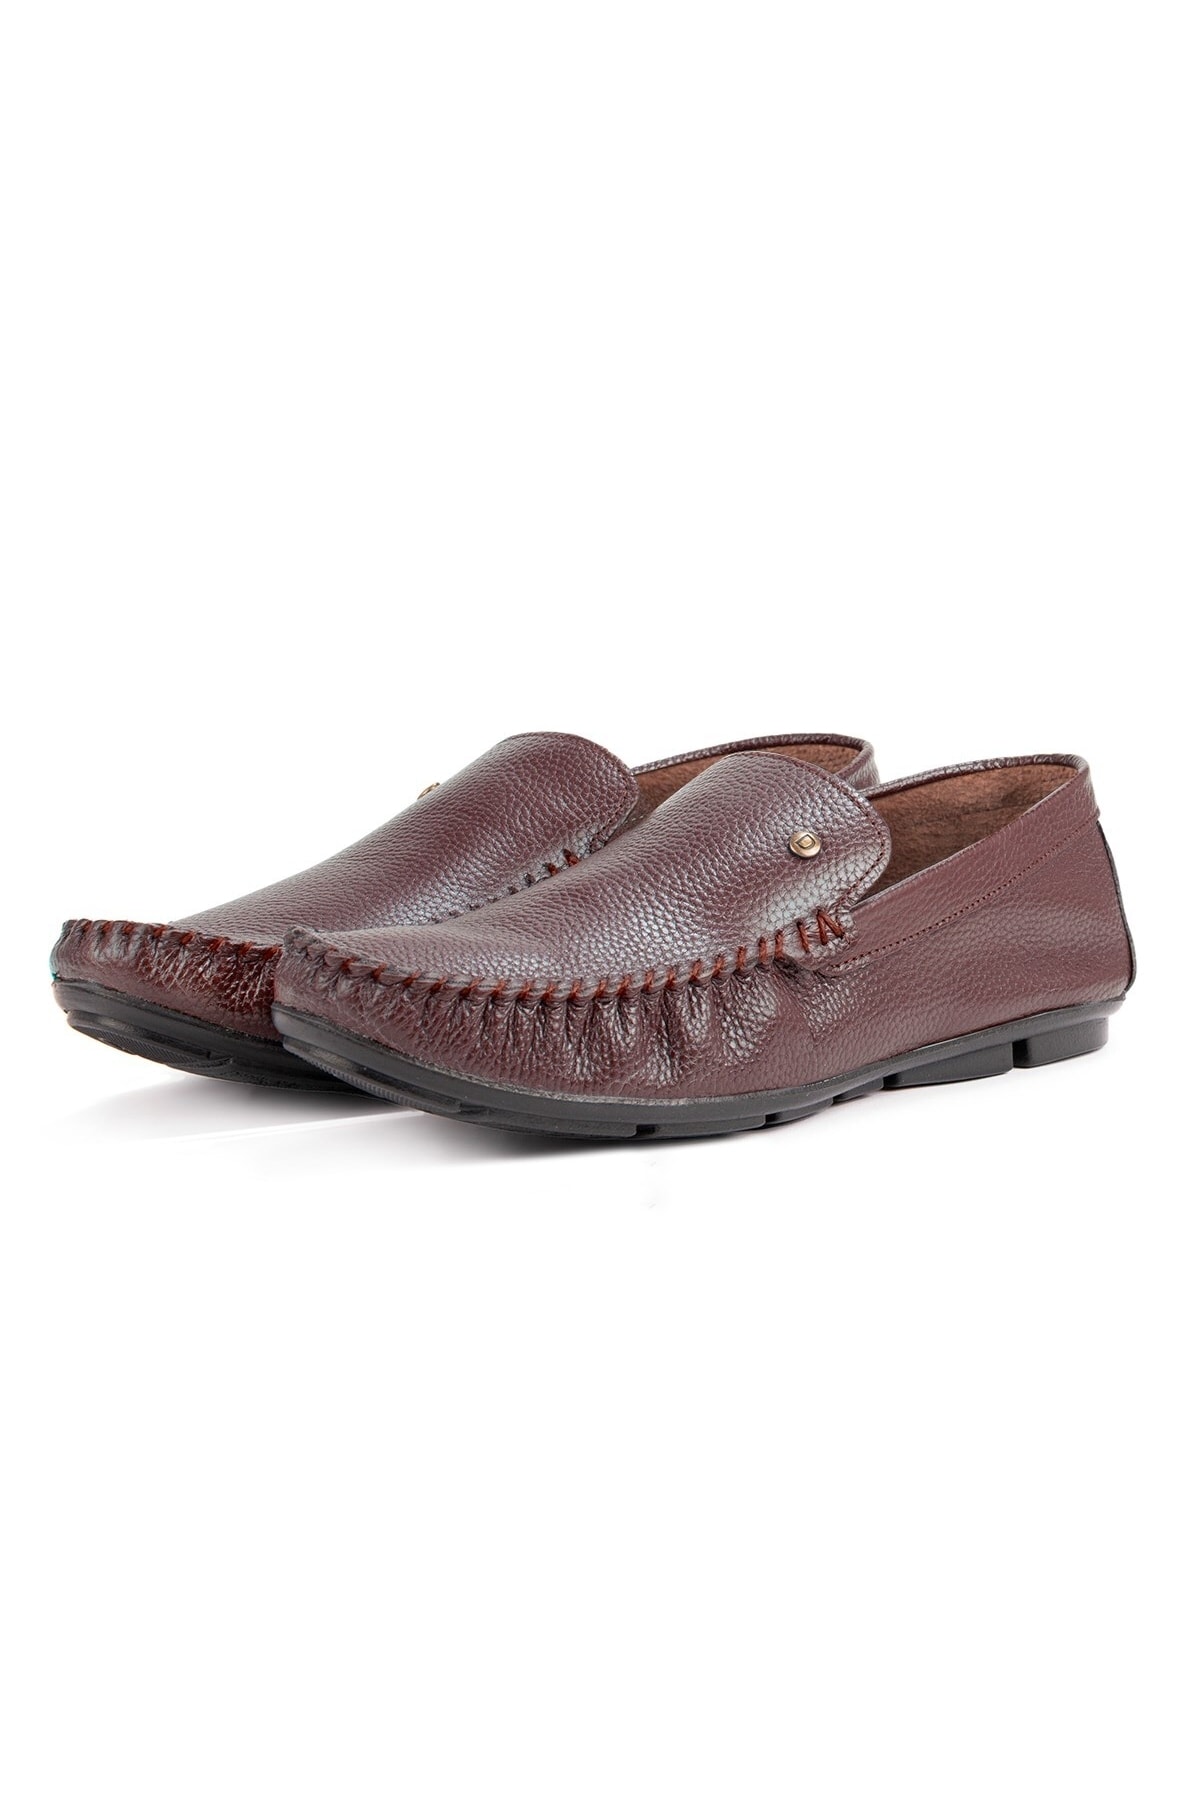 Levně Ducavelli Attic Genuine Leather Men's Casual Shoes , Rok Loafers Brown